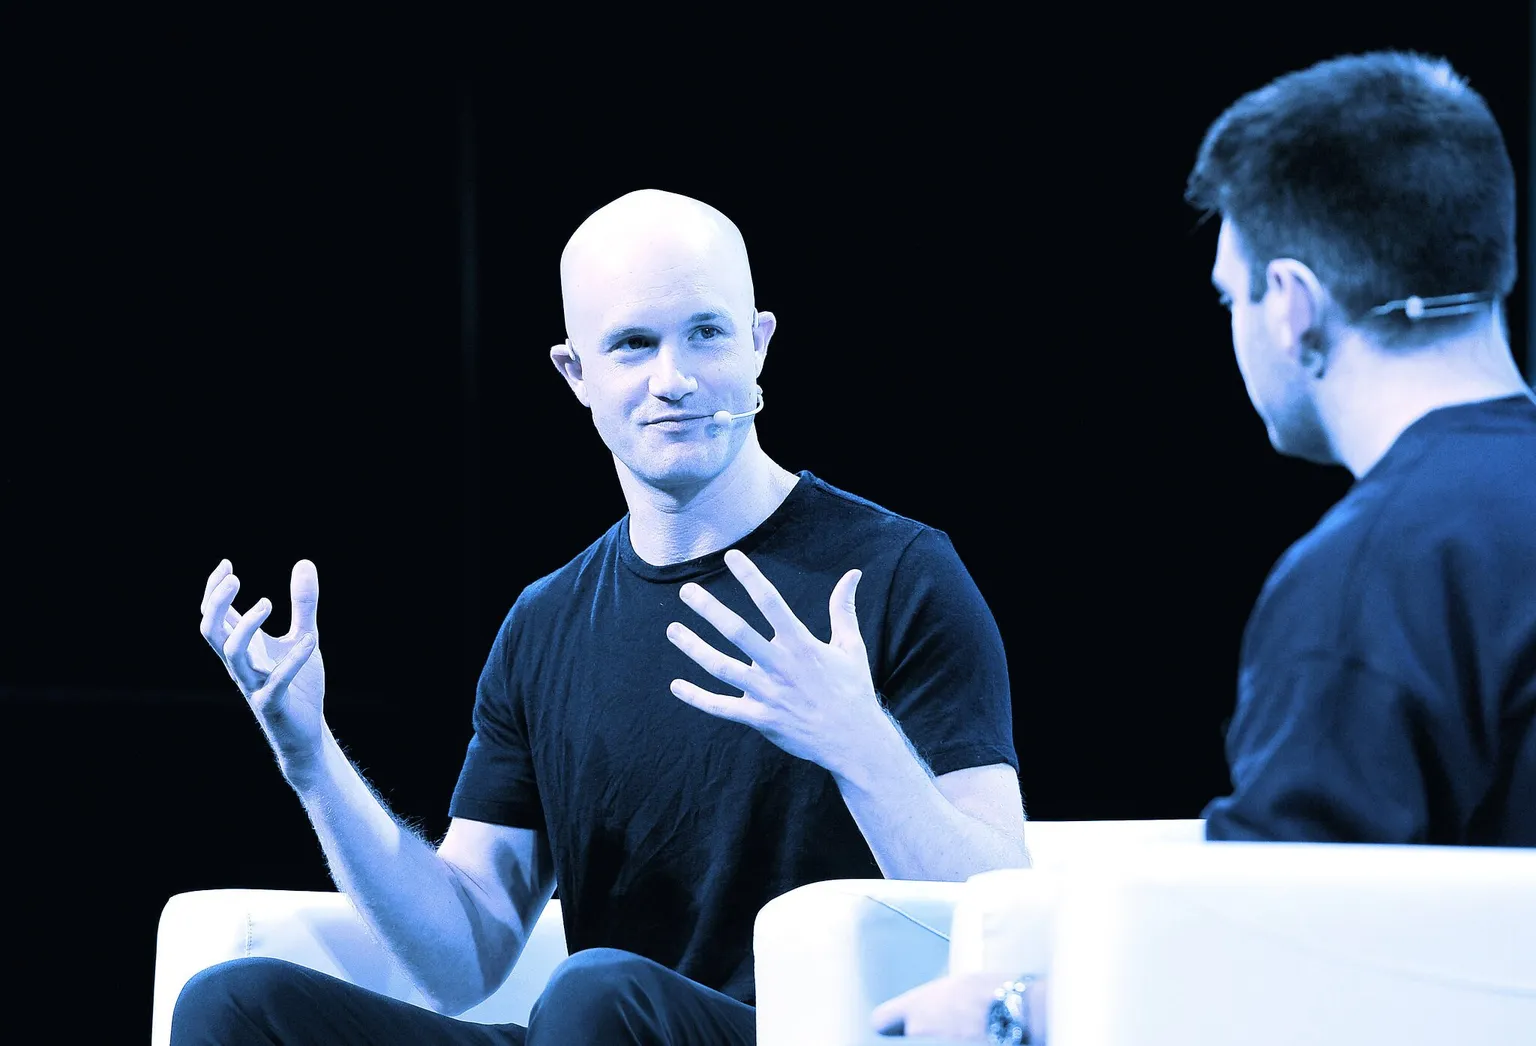 CEO de Coinbase CEO Brian Armstrong. (Photo by Steve Jennings/Getty Images for TechCrunch, Flickr